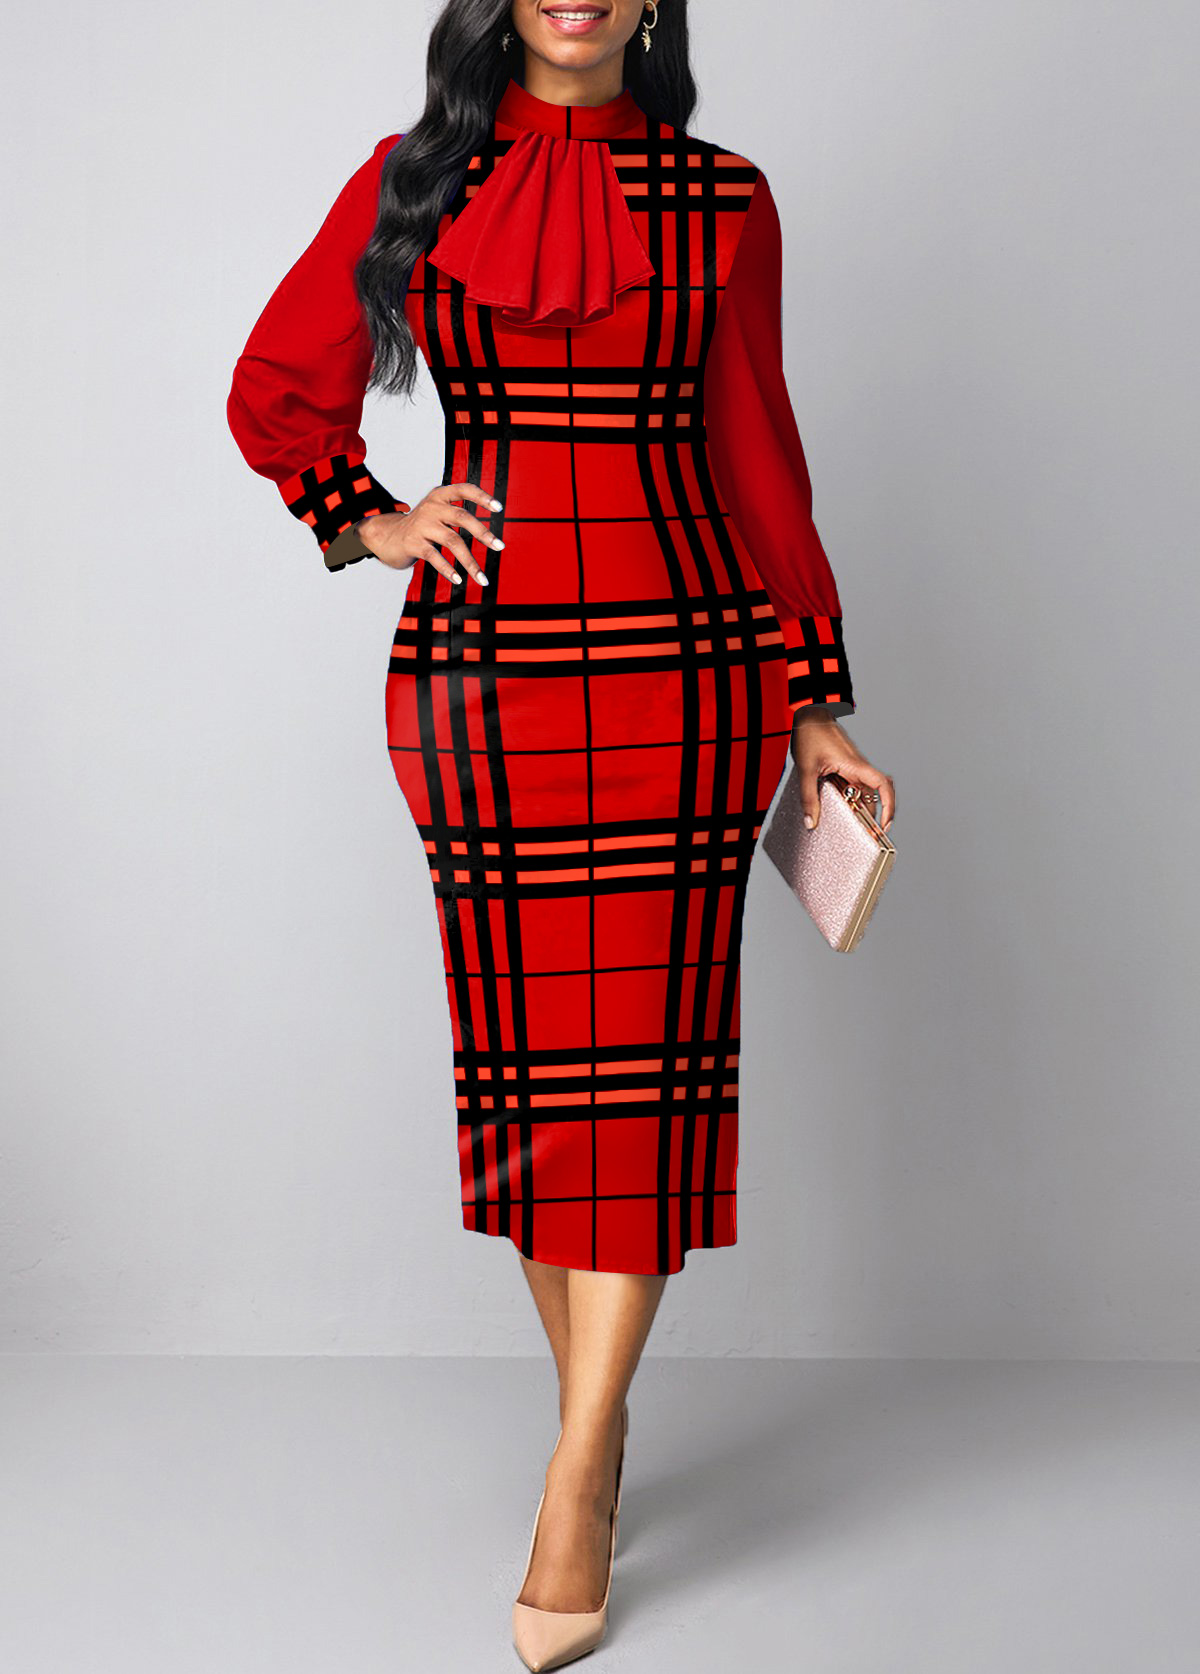 Red Patchwork Plaid Two Piece Suit Dress